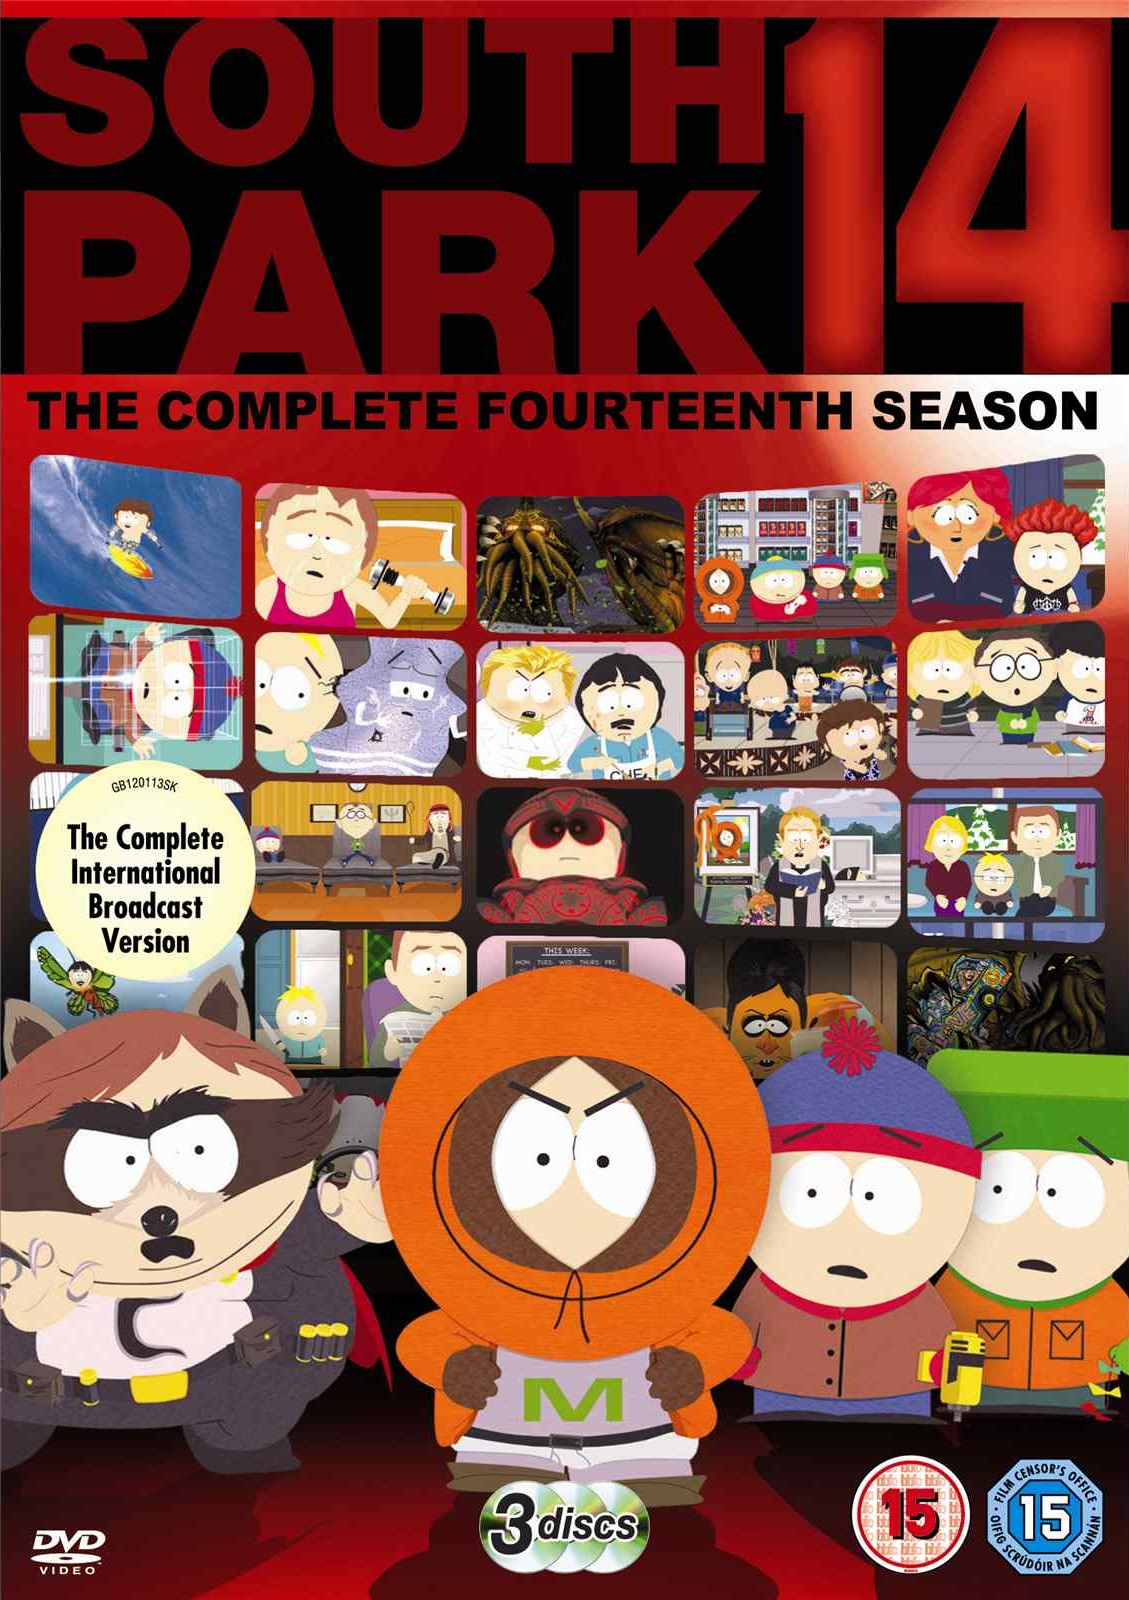 South Park season 14 complete episodes download in HD 720p - TVstock